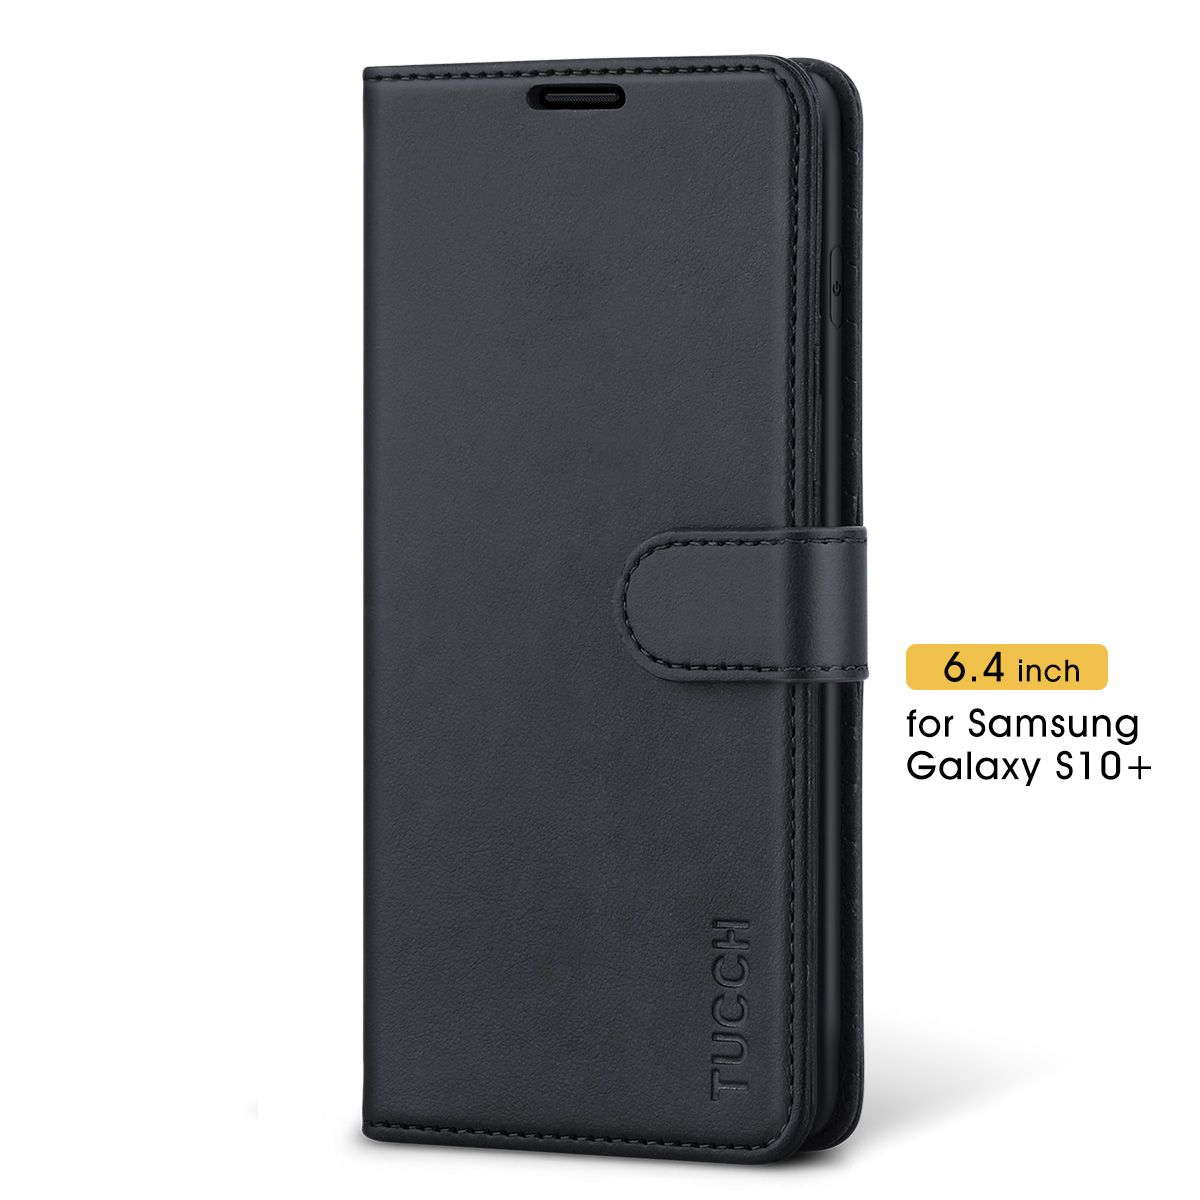 Leather Cover Compatible with Samsung Galaxy S10 Plus Black Wallet Case for Samsung Galaxy S10 Plus